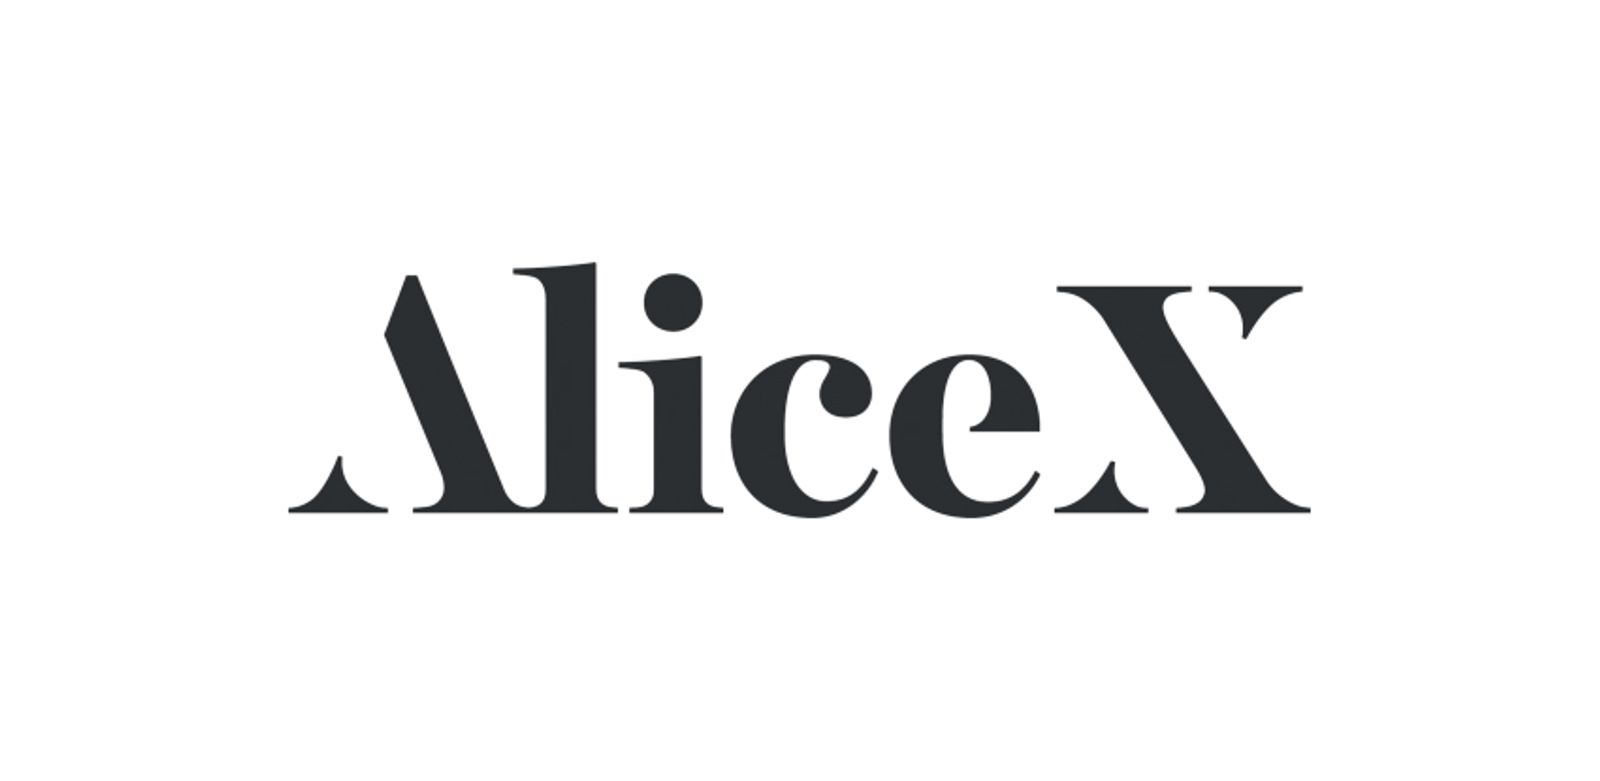 AliceX Signs AJ Studios As Exclusive Provider of Latin American Models